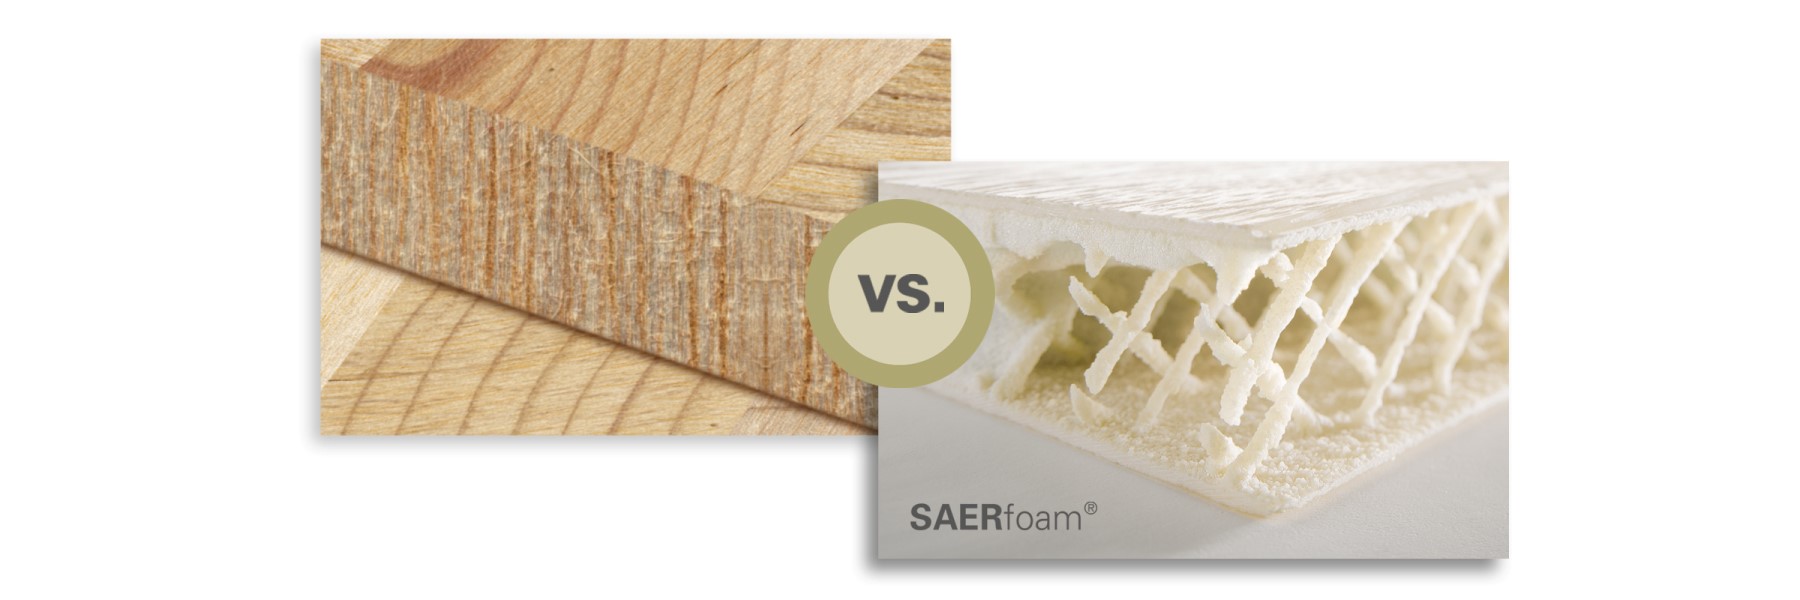 SAERfoam is our structural core material containing 3D glass bridges and has been optimized for infusion, RTM and compression processes.